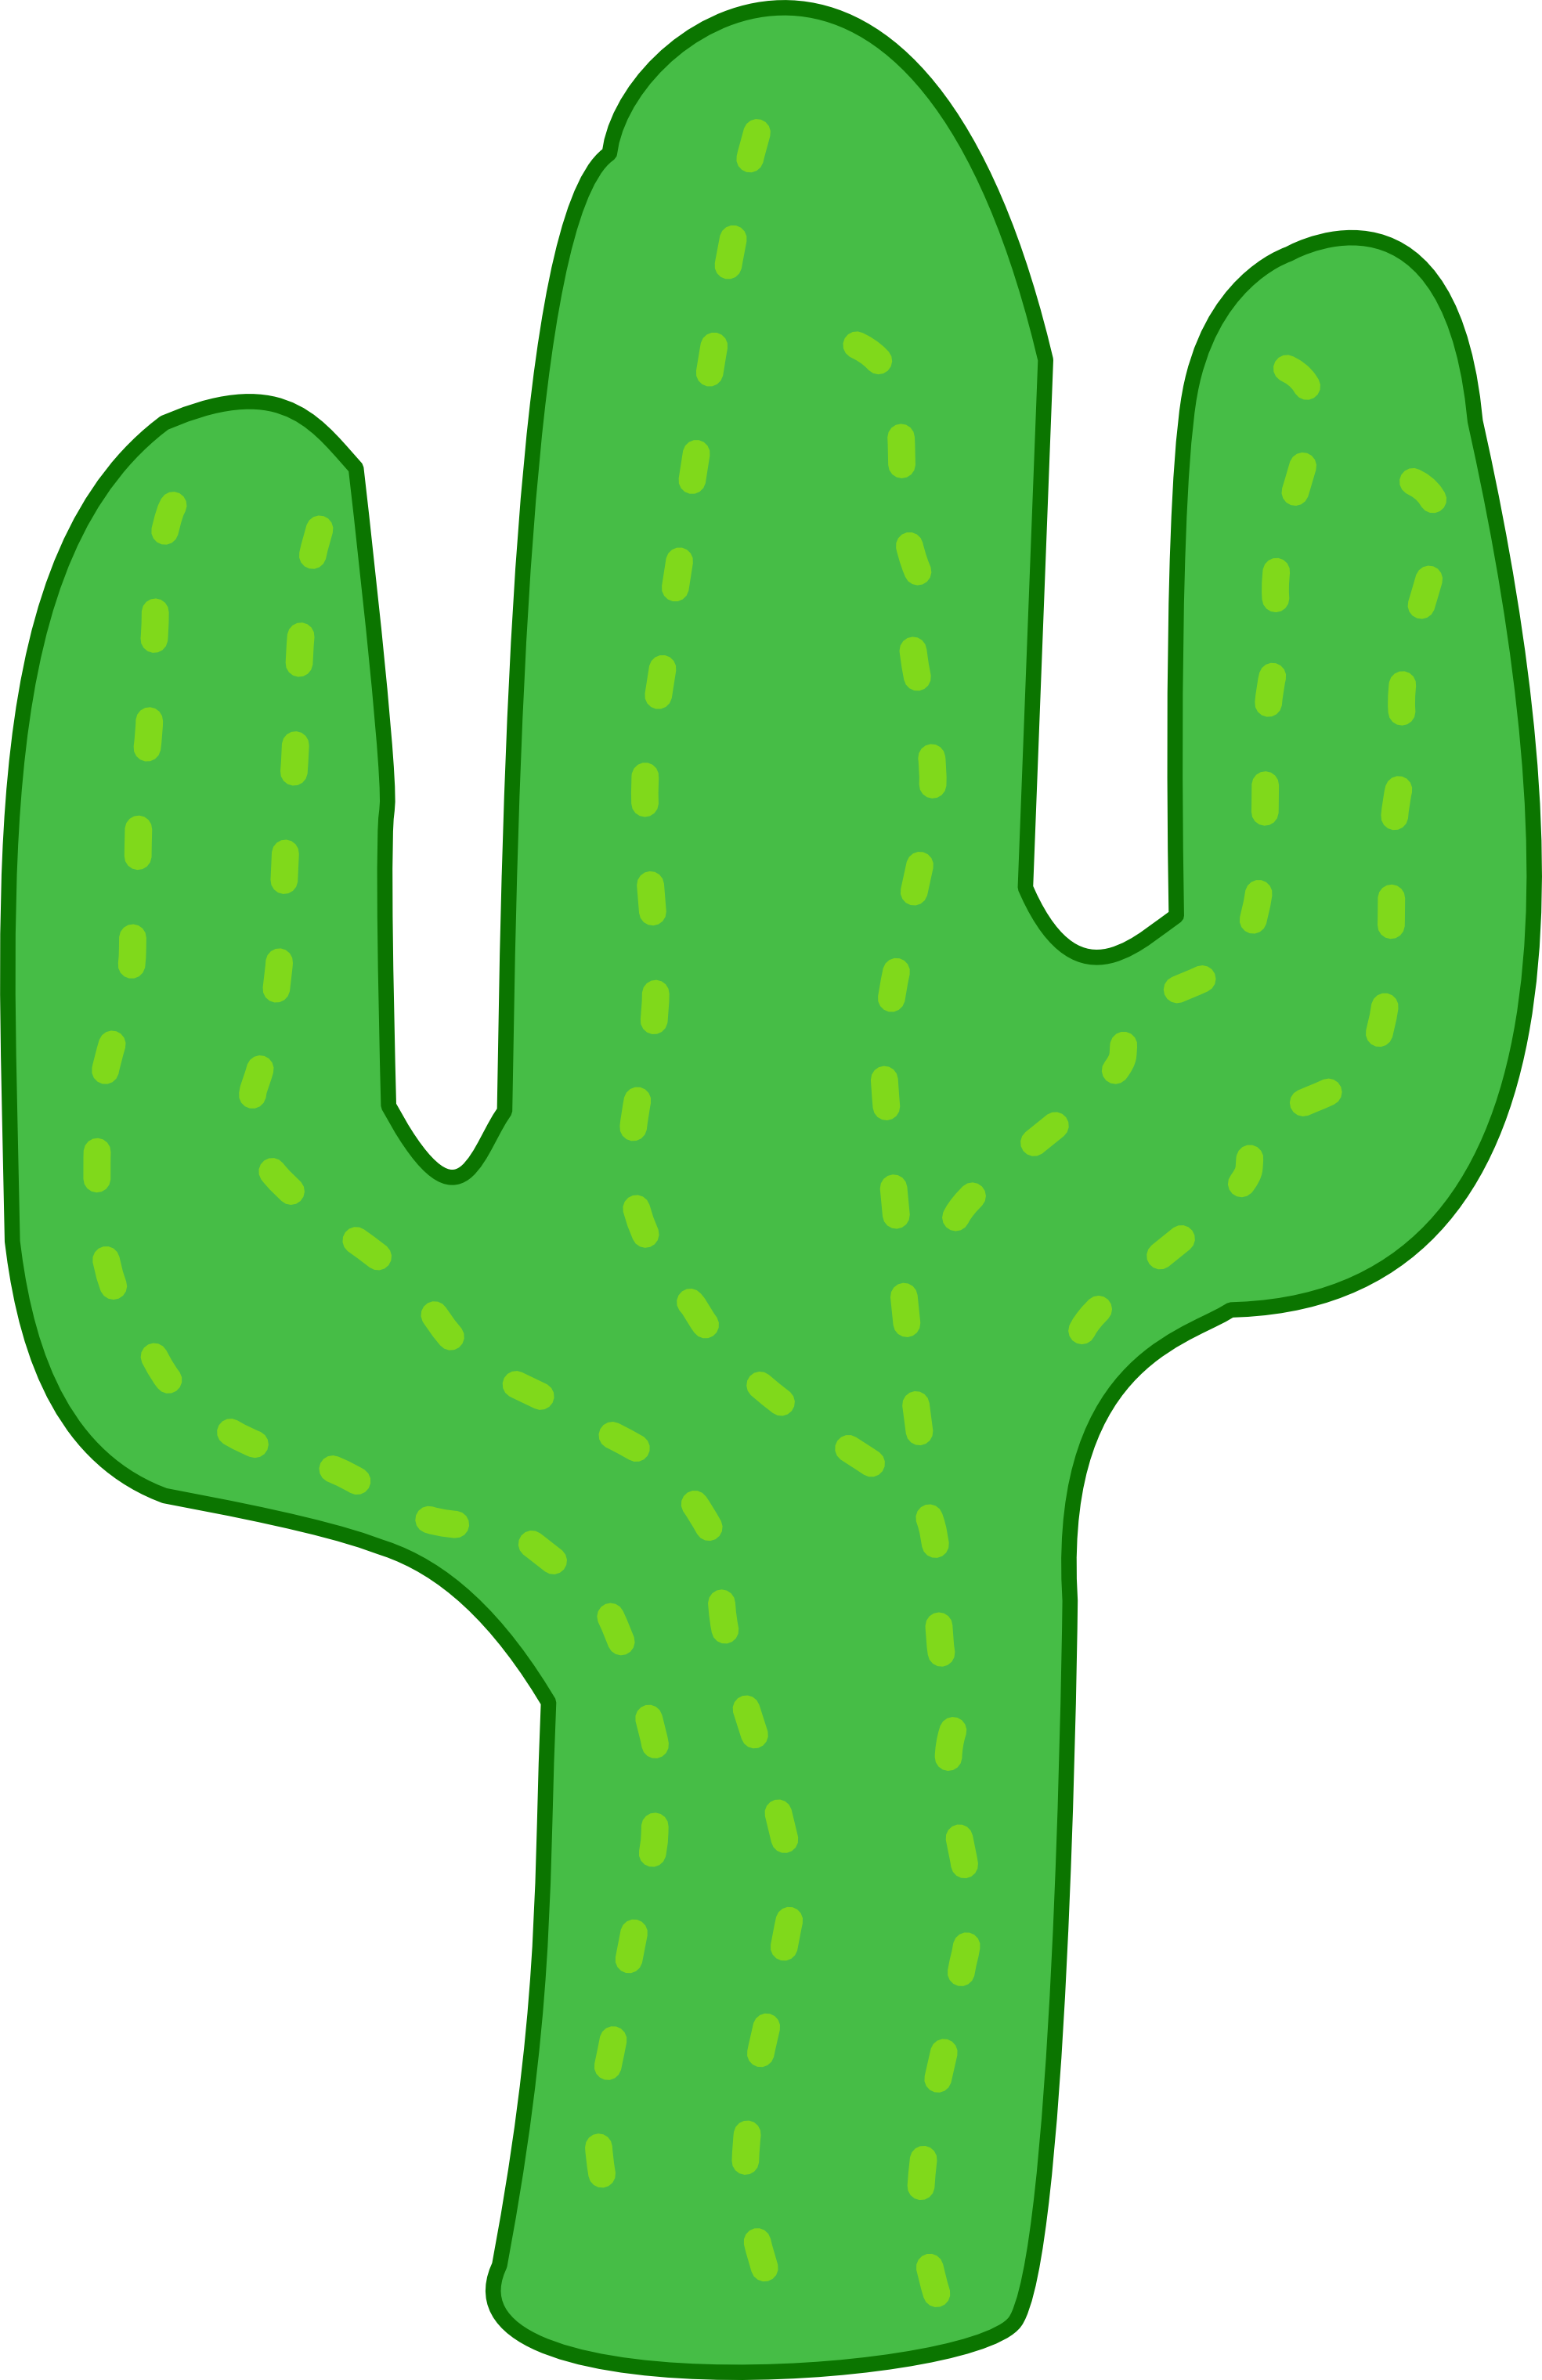 Cactus clipart clear background, Cactus clear background